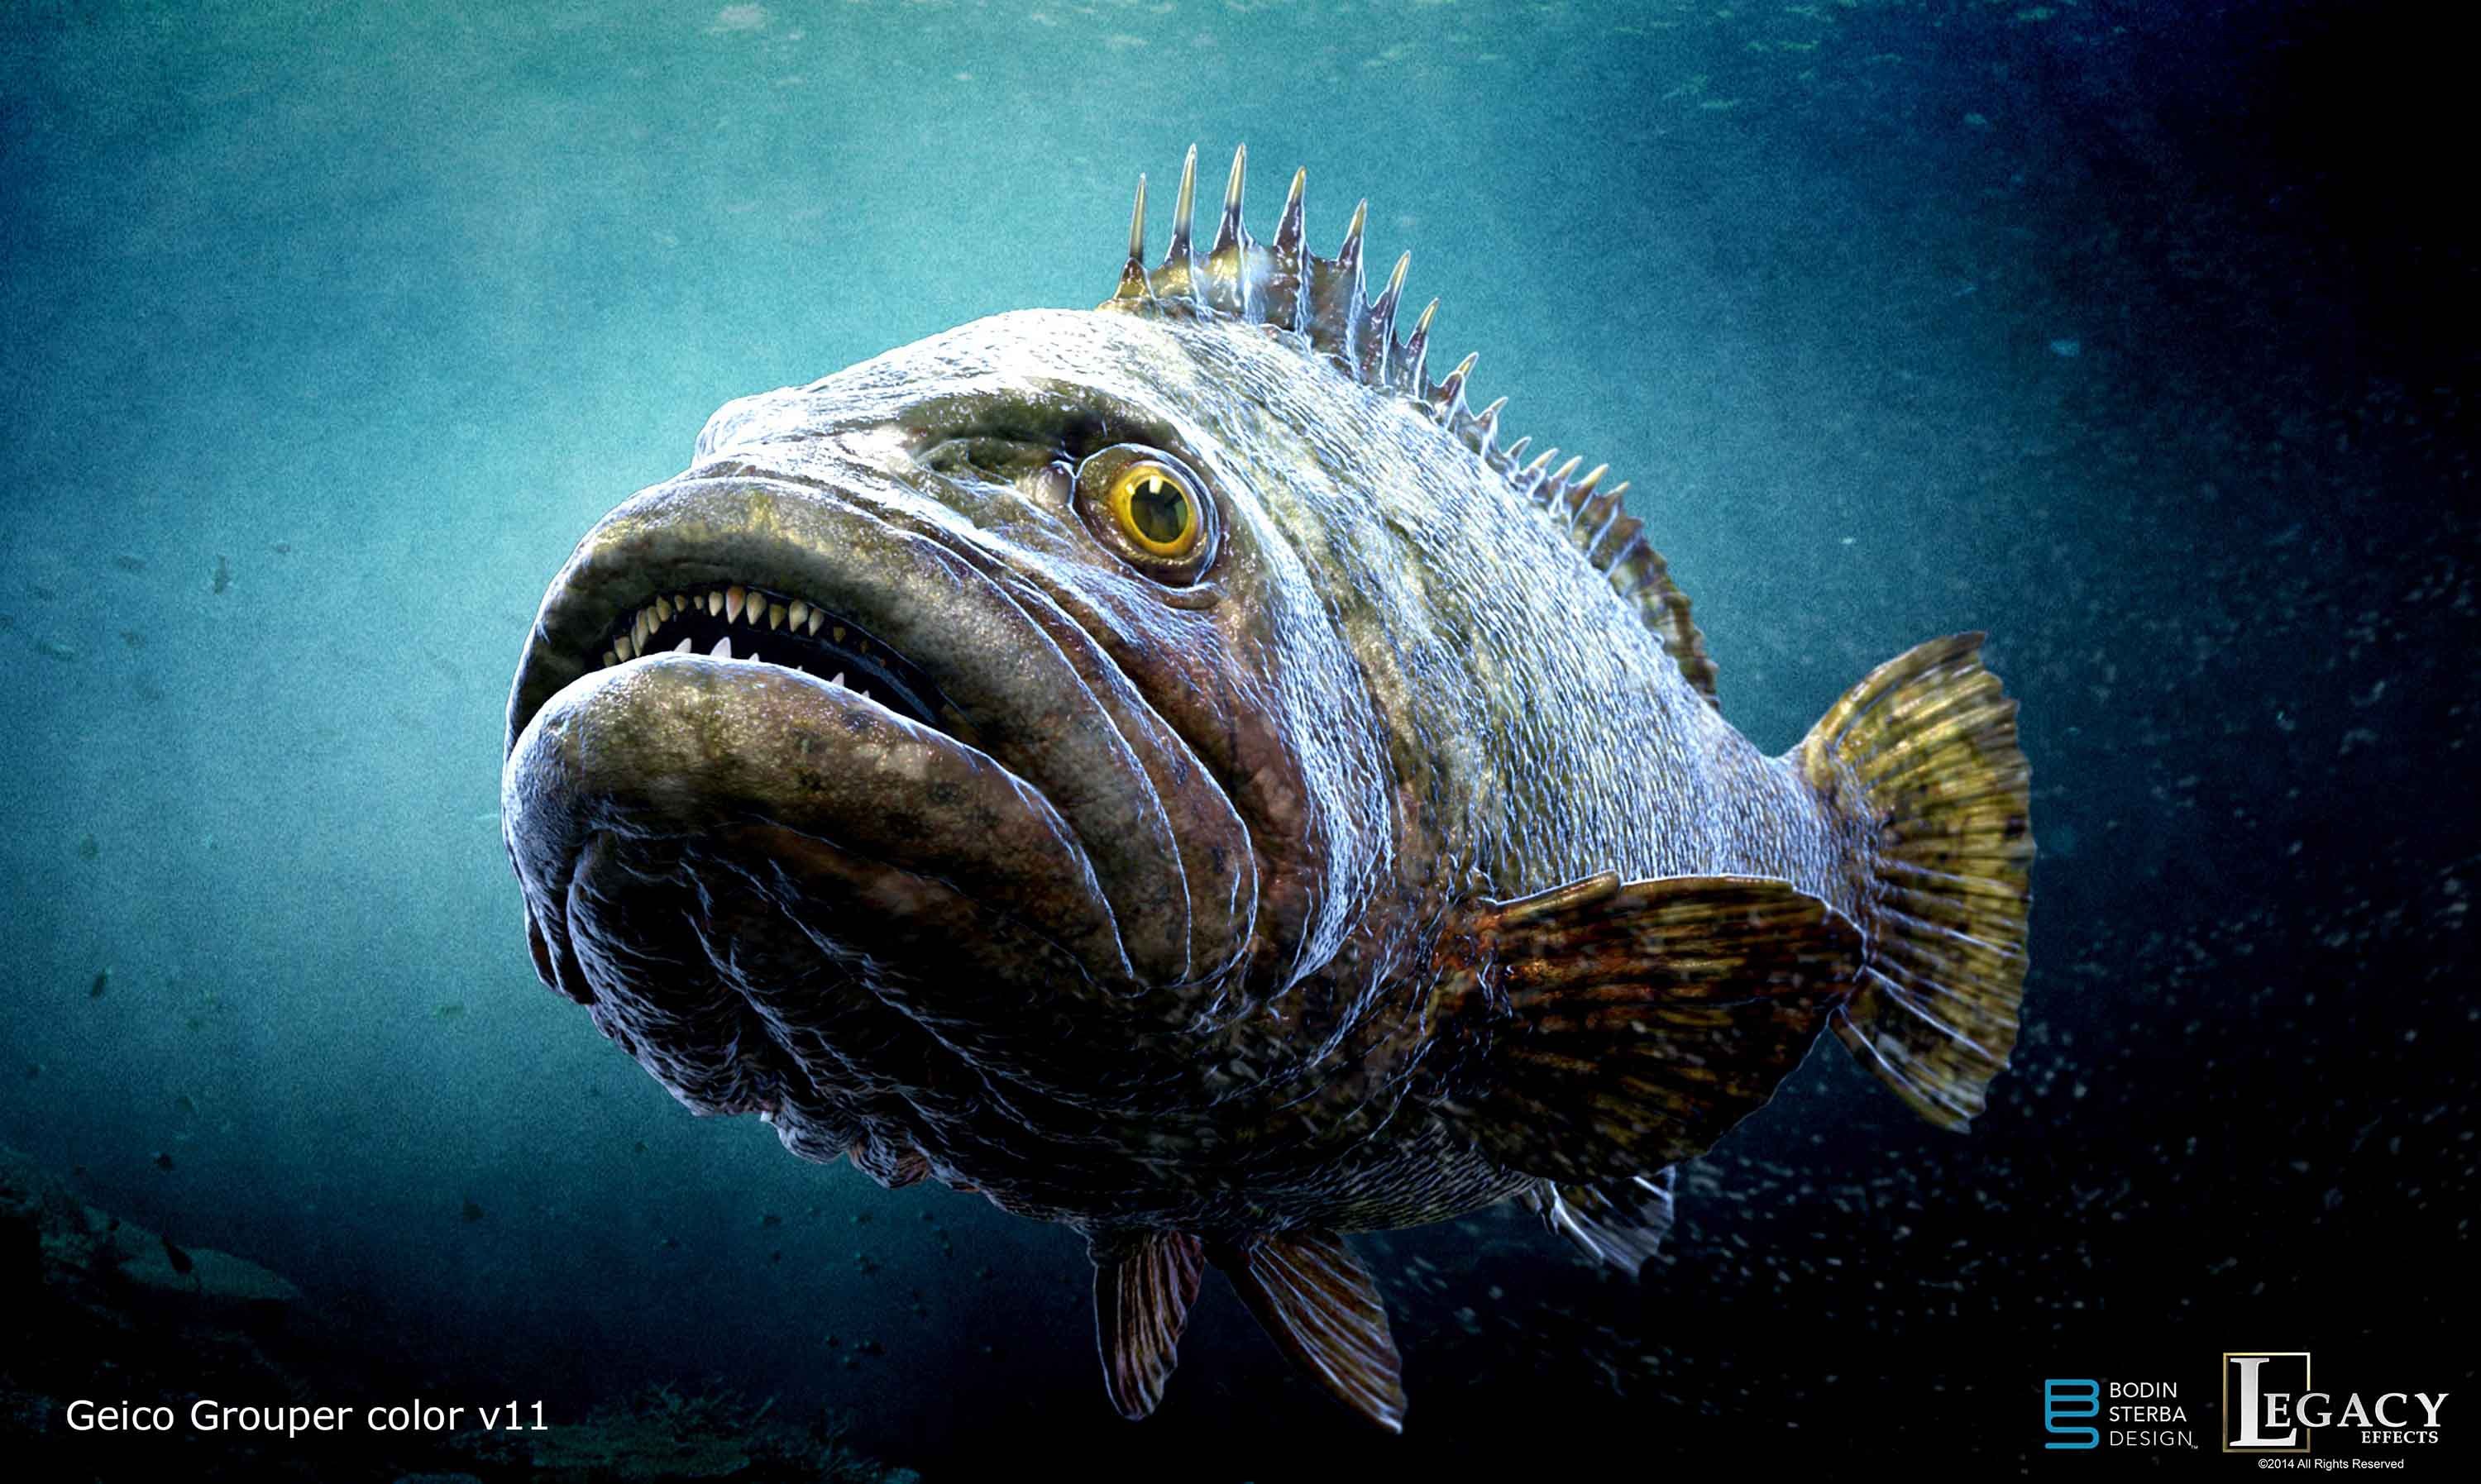 Giant Fish for Geico Fisherman Commercial | BODIN STERBA DESIGN